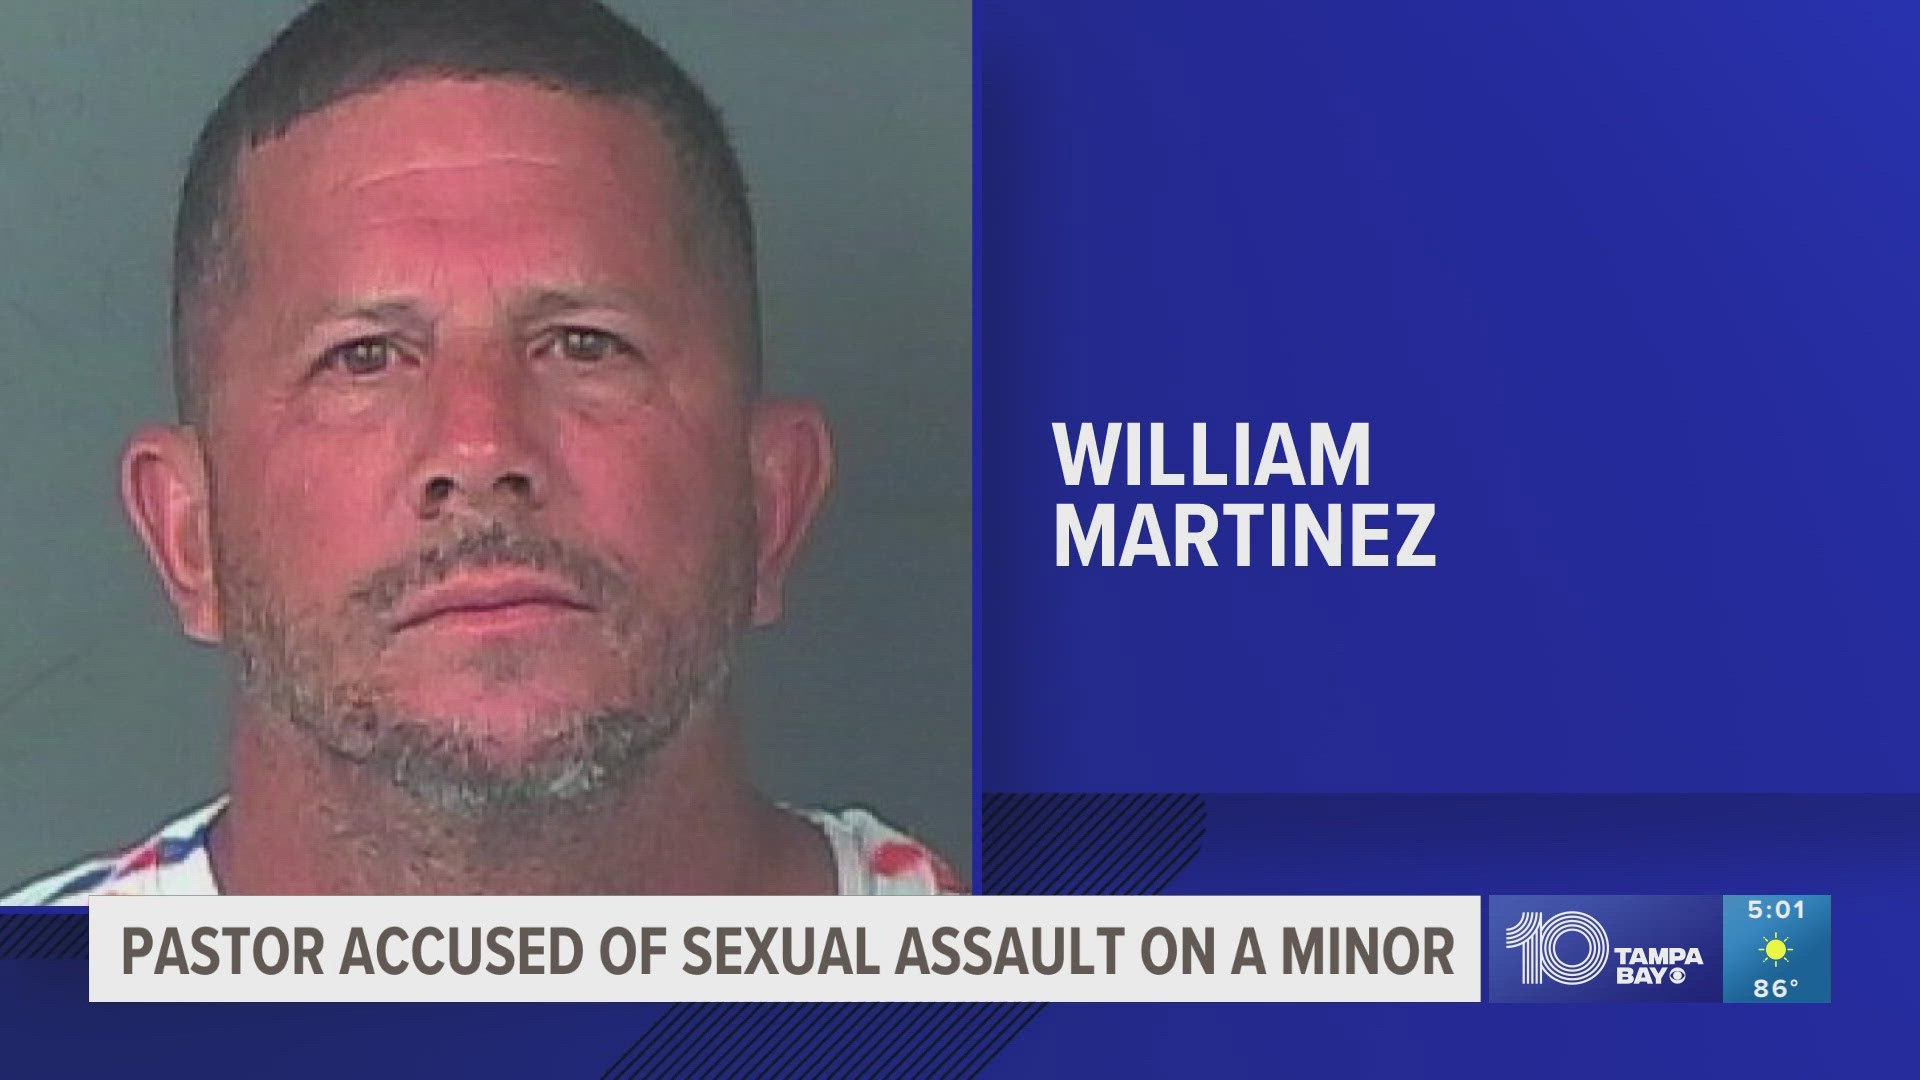 William Martinez was reportedly alone with the underage girl at his home. Deputies say he gave her an alcoholic drink and a THC gummy before the assault took place.